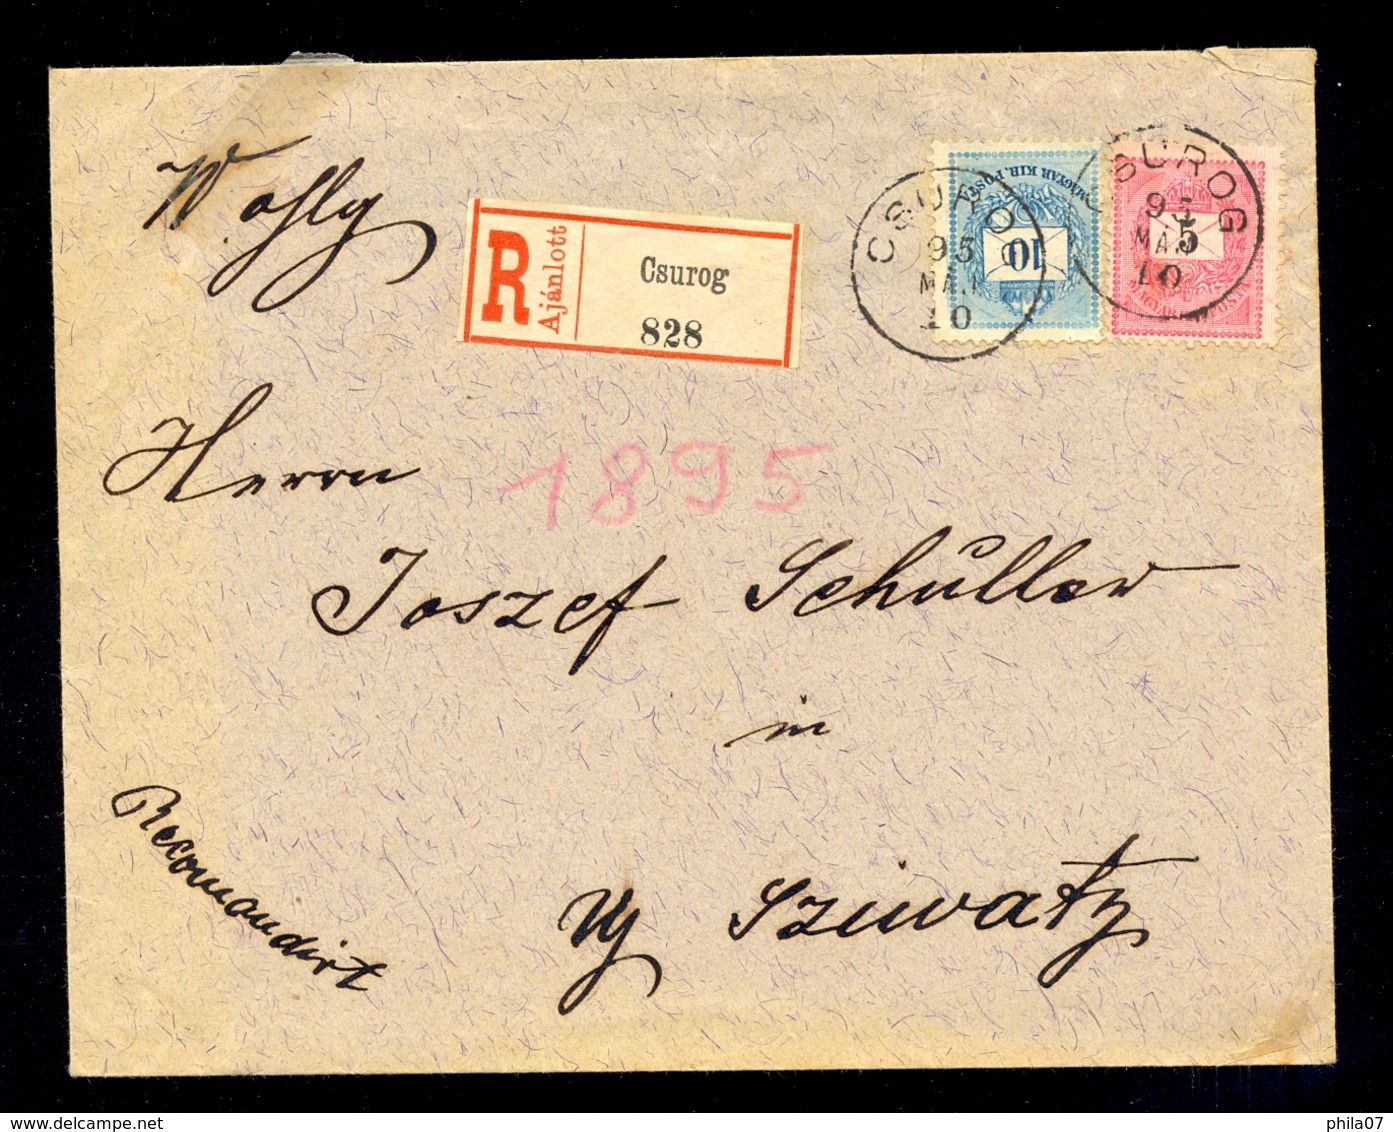 Serbia - Letter Sent By Registered Mail From Čuruga 10.05. 1895. Excellent Quality Of Cancels, Arrival On The Reverse. - Serbia